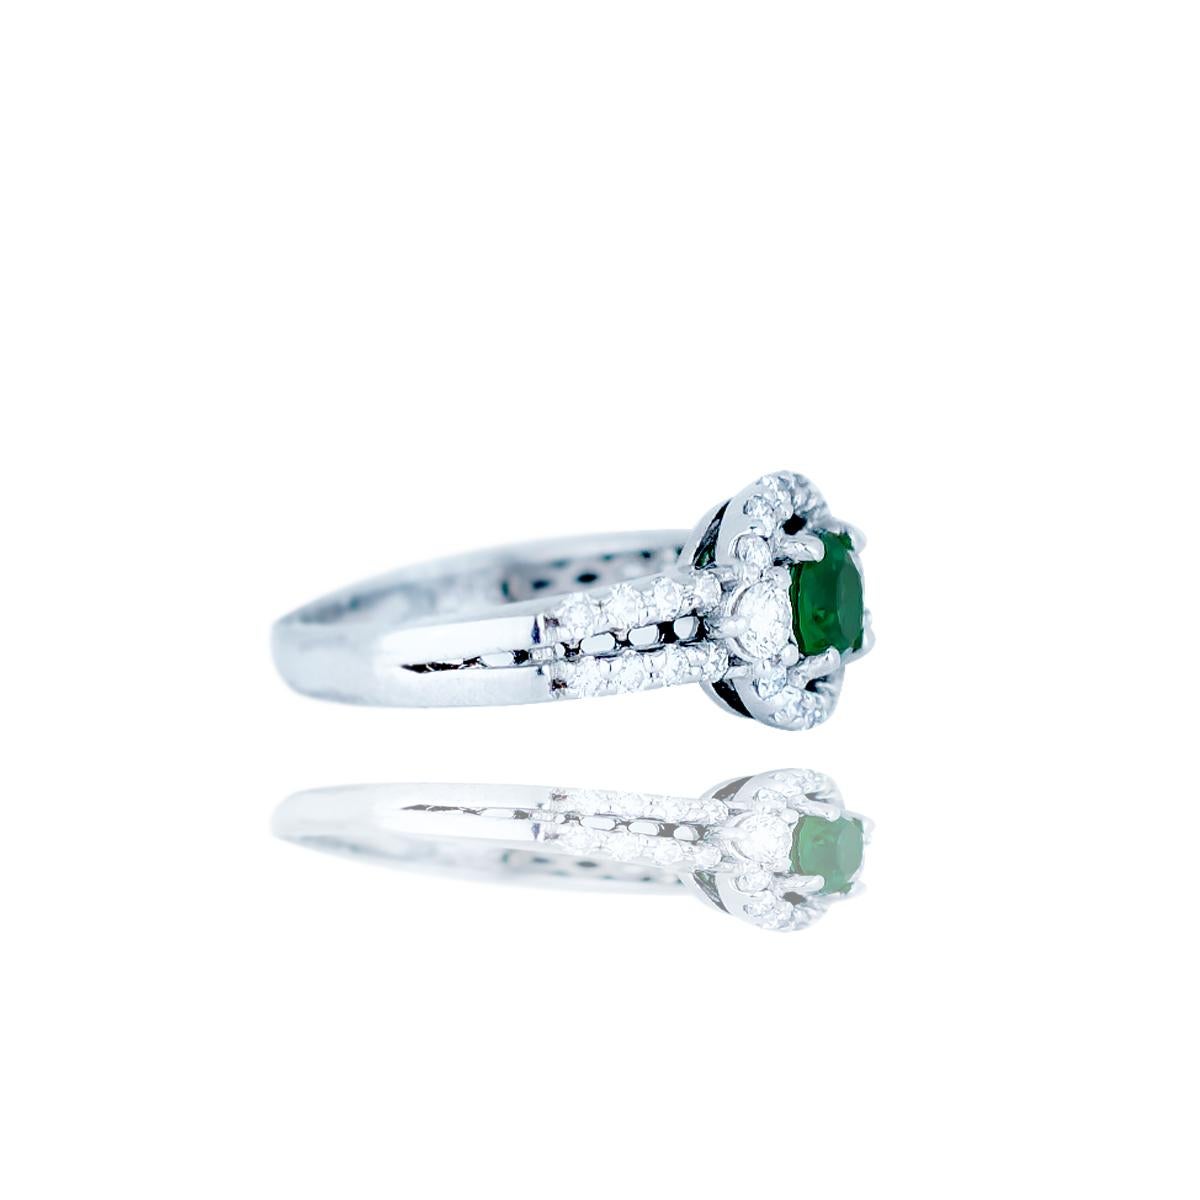 Round Cut Chatham Emerald Set with Diamonds in Halo Diamond Ring, 1.25 Carat For Sale